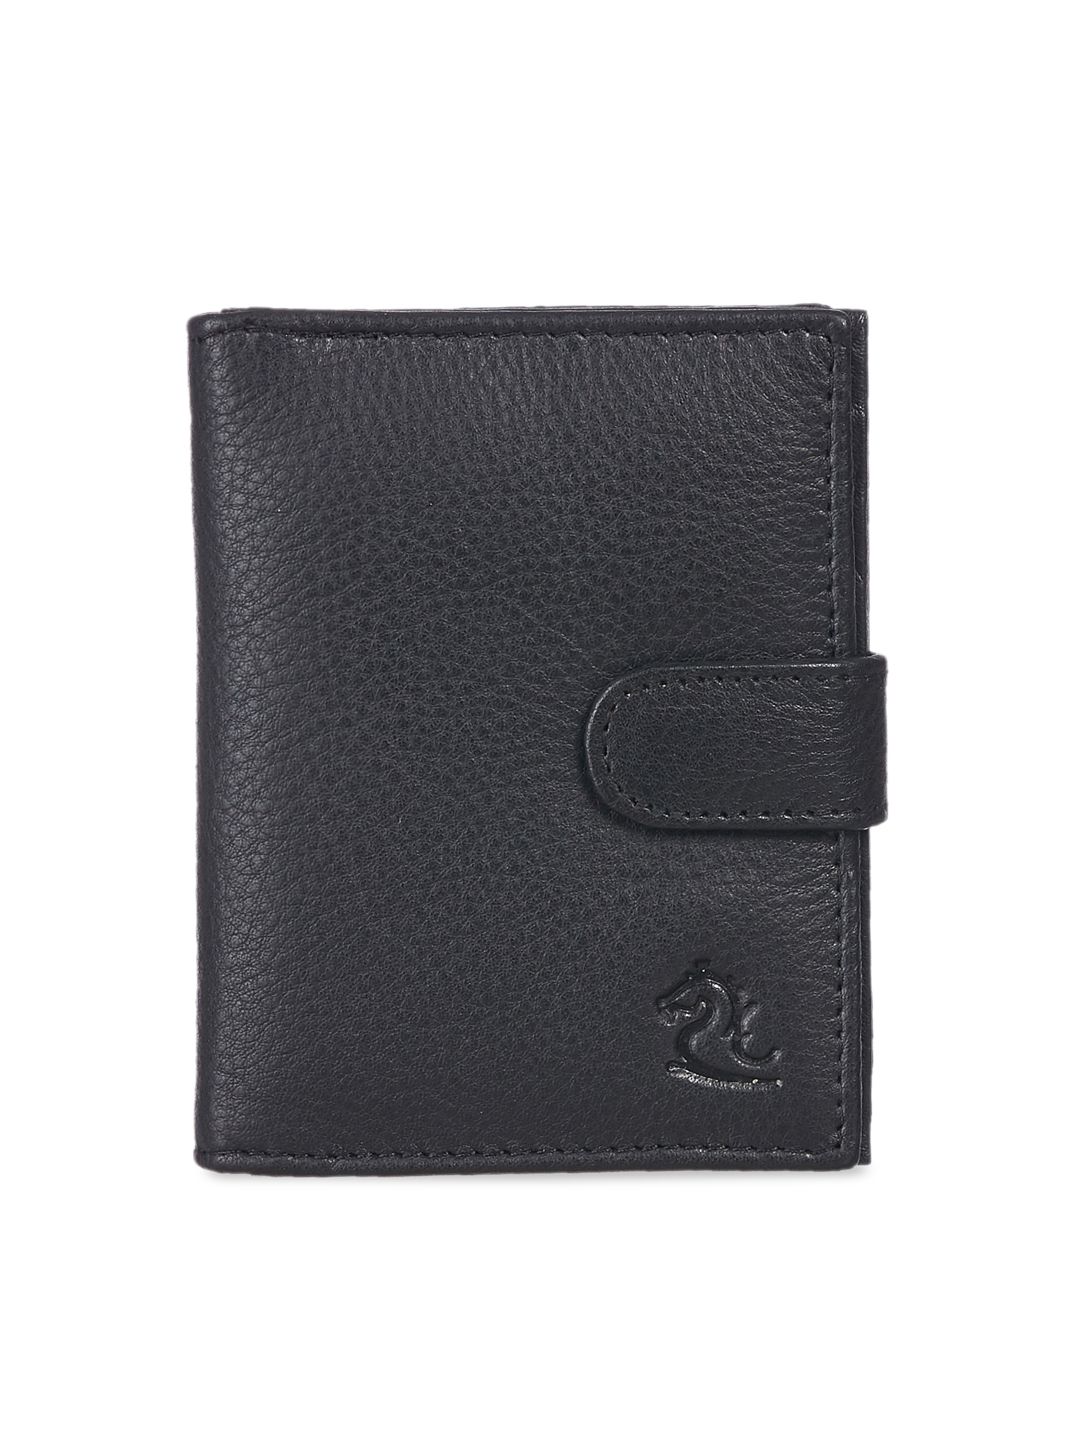 Kara Unisex Black Solid Leather Card Holder Price in India